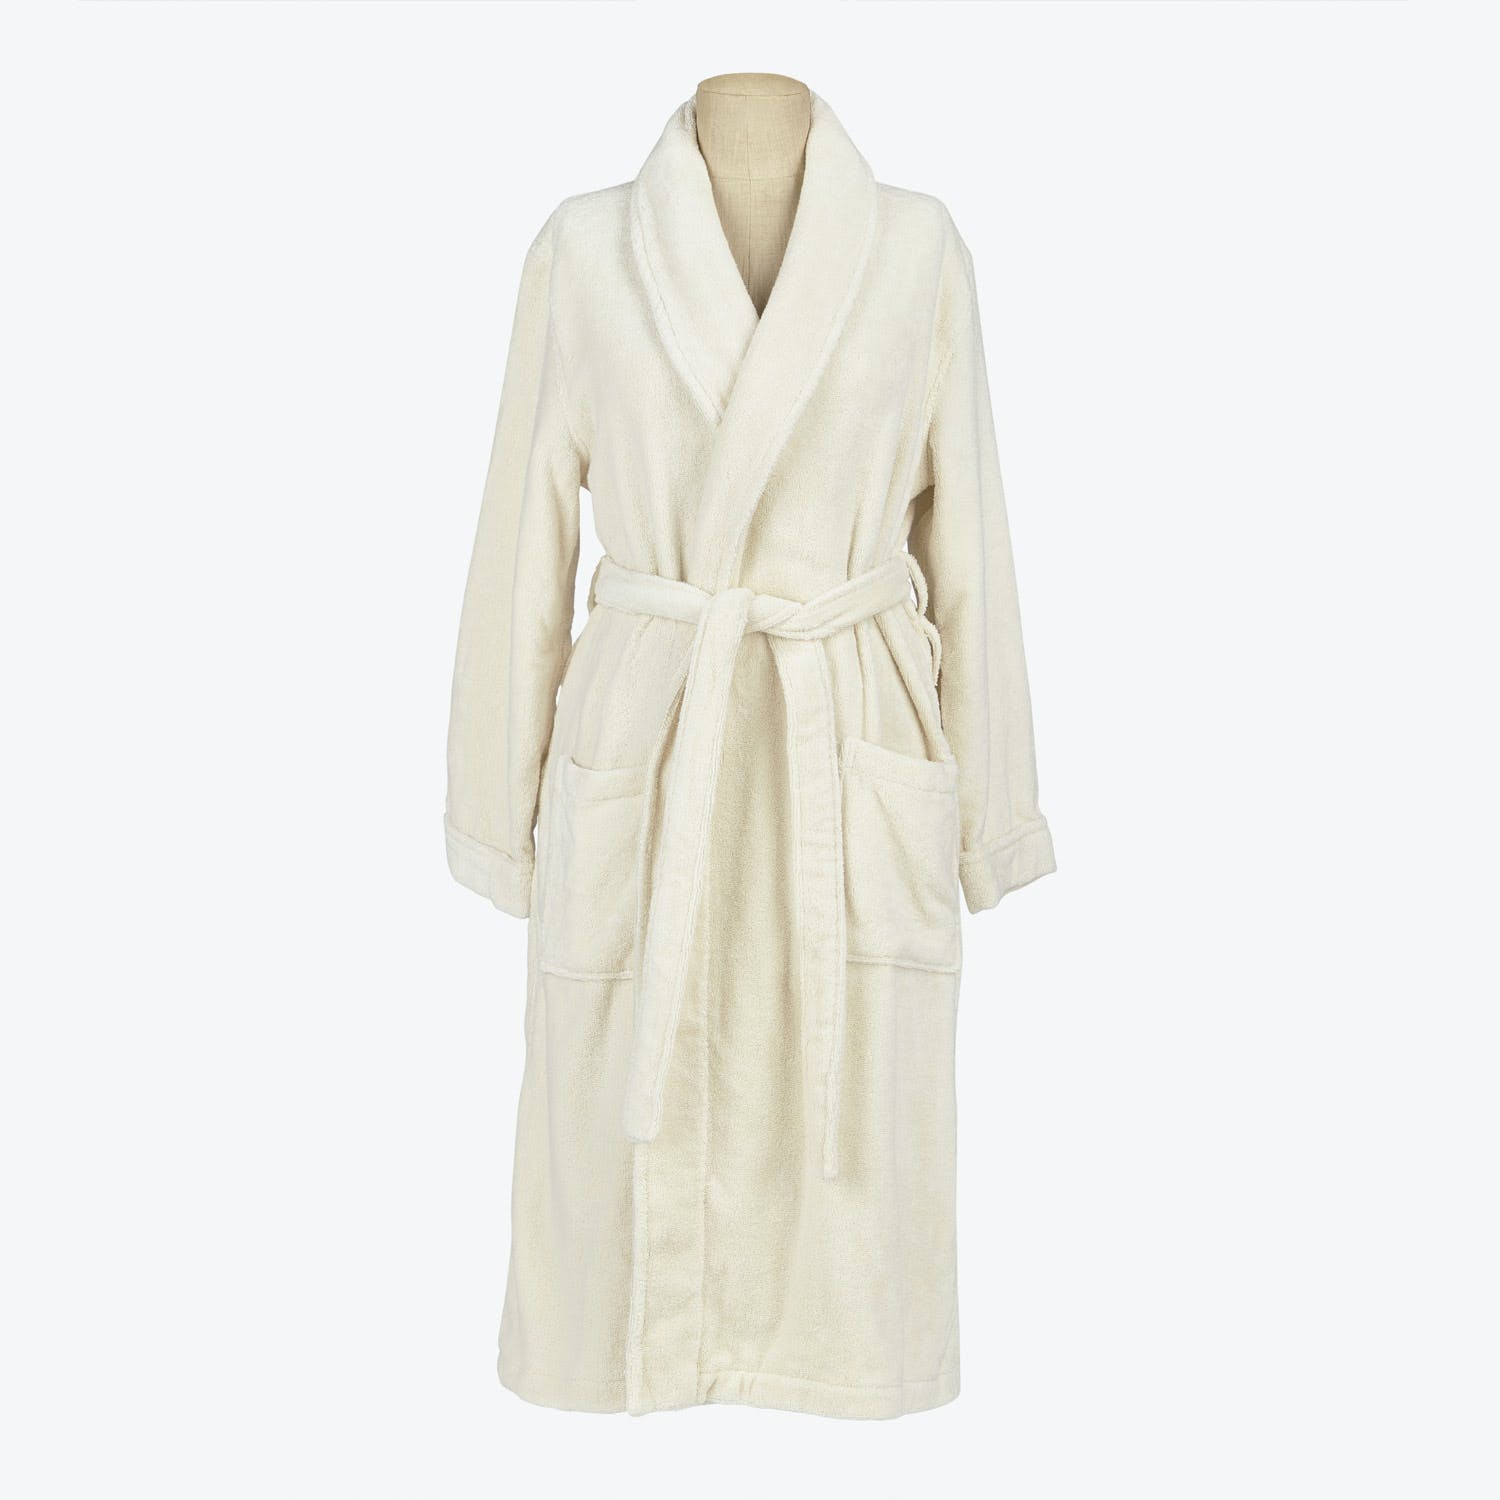 Soft and plush cotton bathrobe with shawl collar and pockets.